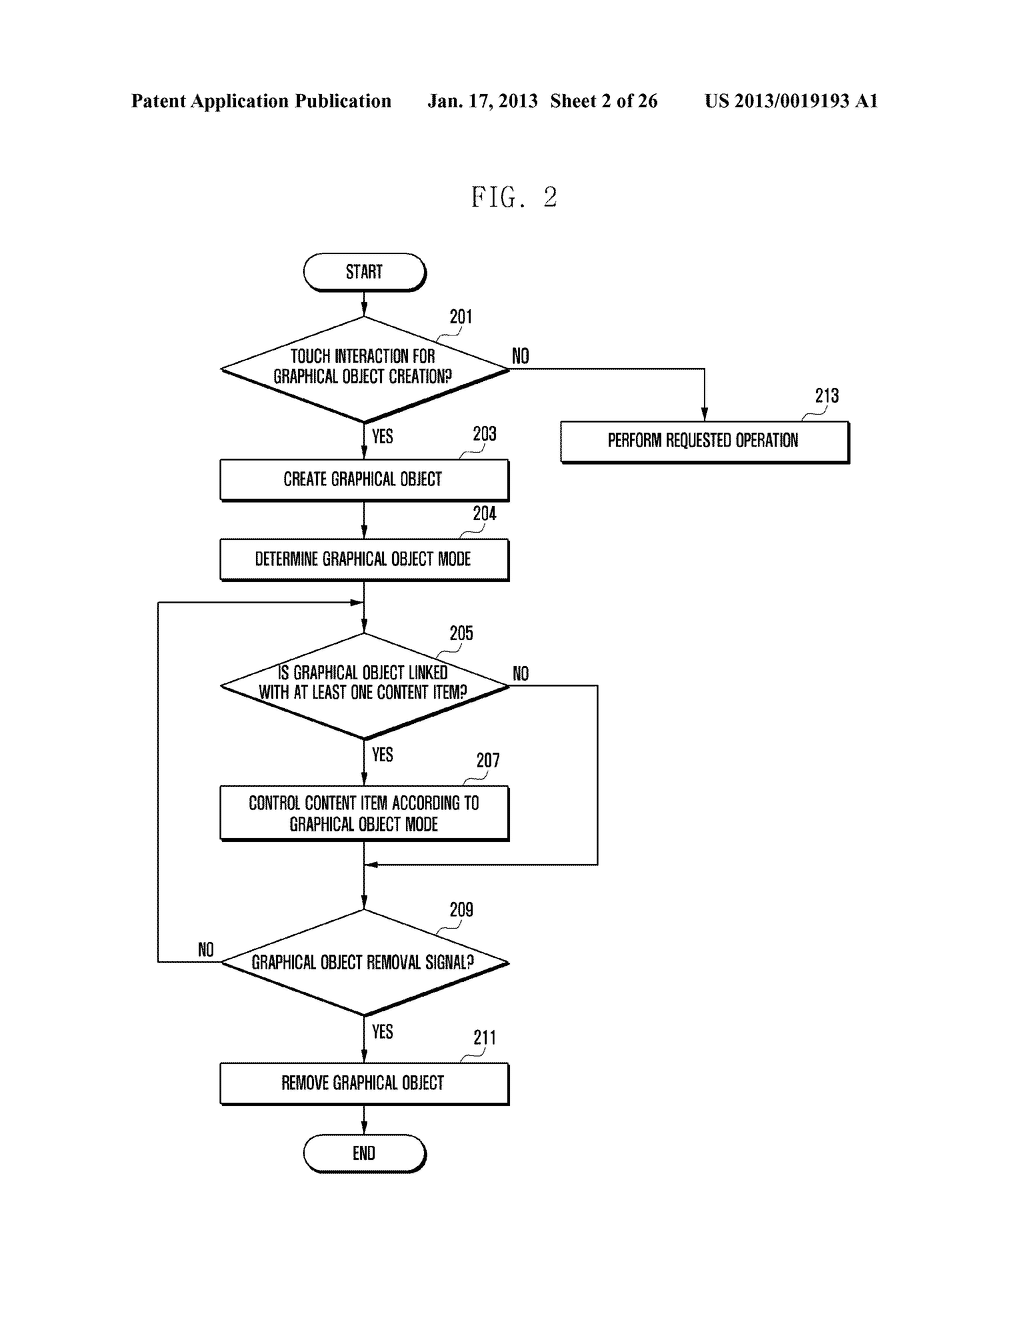 METHOD AND APPARATUS FOR CONTROLLING CONTENT USING GRAPHICAL OBJECTAANM RHEE; Taik HeonAACI SeoulAACO KRAAGP RHEE; Taik Heon Seoul KRAANM Lee; Sang IlAACI Suwon-siAACO KRAAGP Lee; Sang Il Suwon-si KRAANM Eun; Dong JinAACI Bucheon-siAACO KRAAGP Eun; Dong Jin Bucheon-si KRAANM Kuk; Sung BinAACI Suwon-siAACO KRAAGP Kuk; Sung Bin Suwon-si KR - diagram, schematic, and image 03